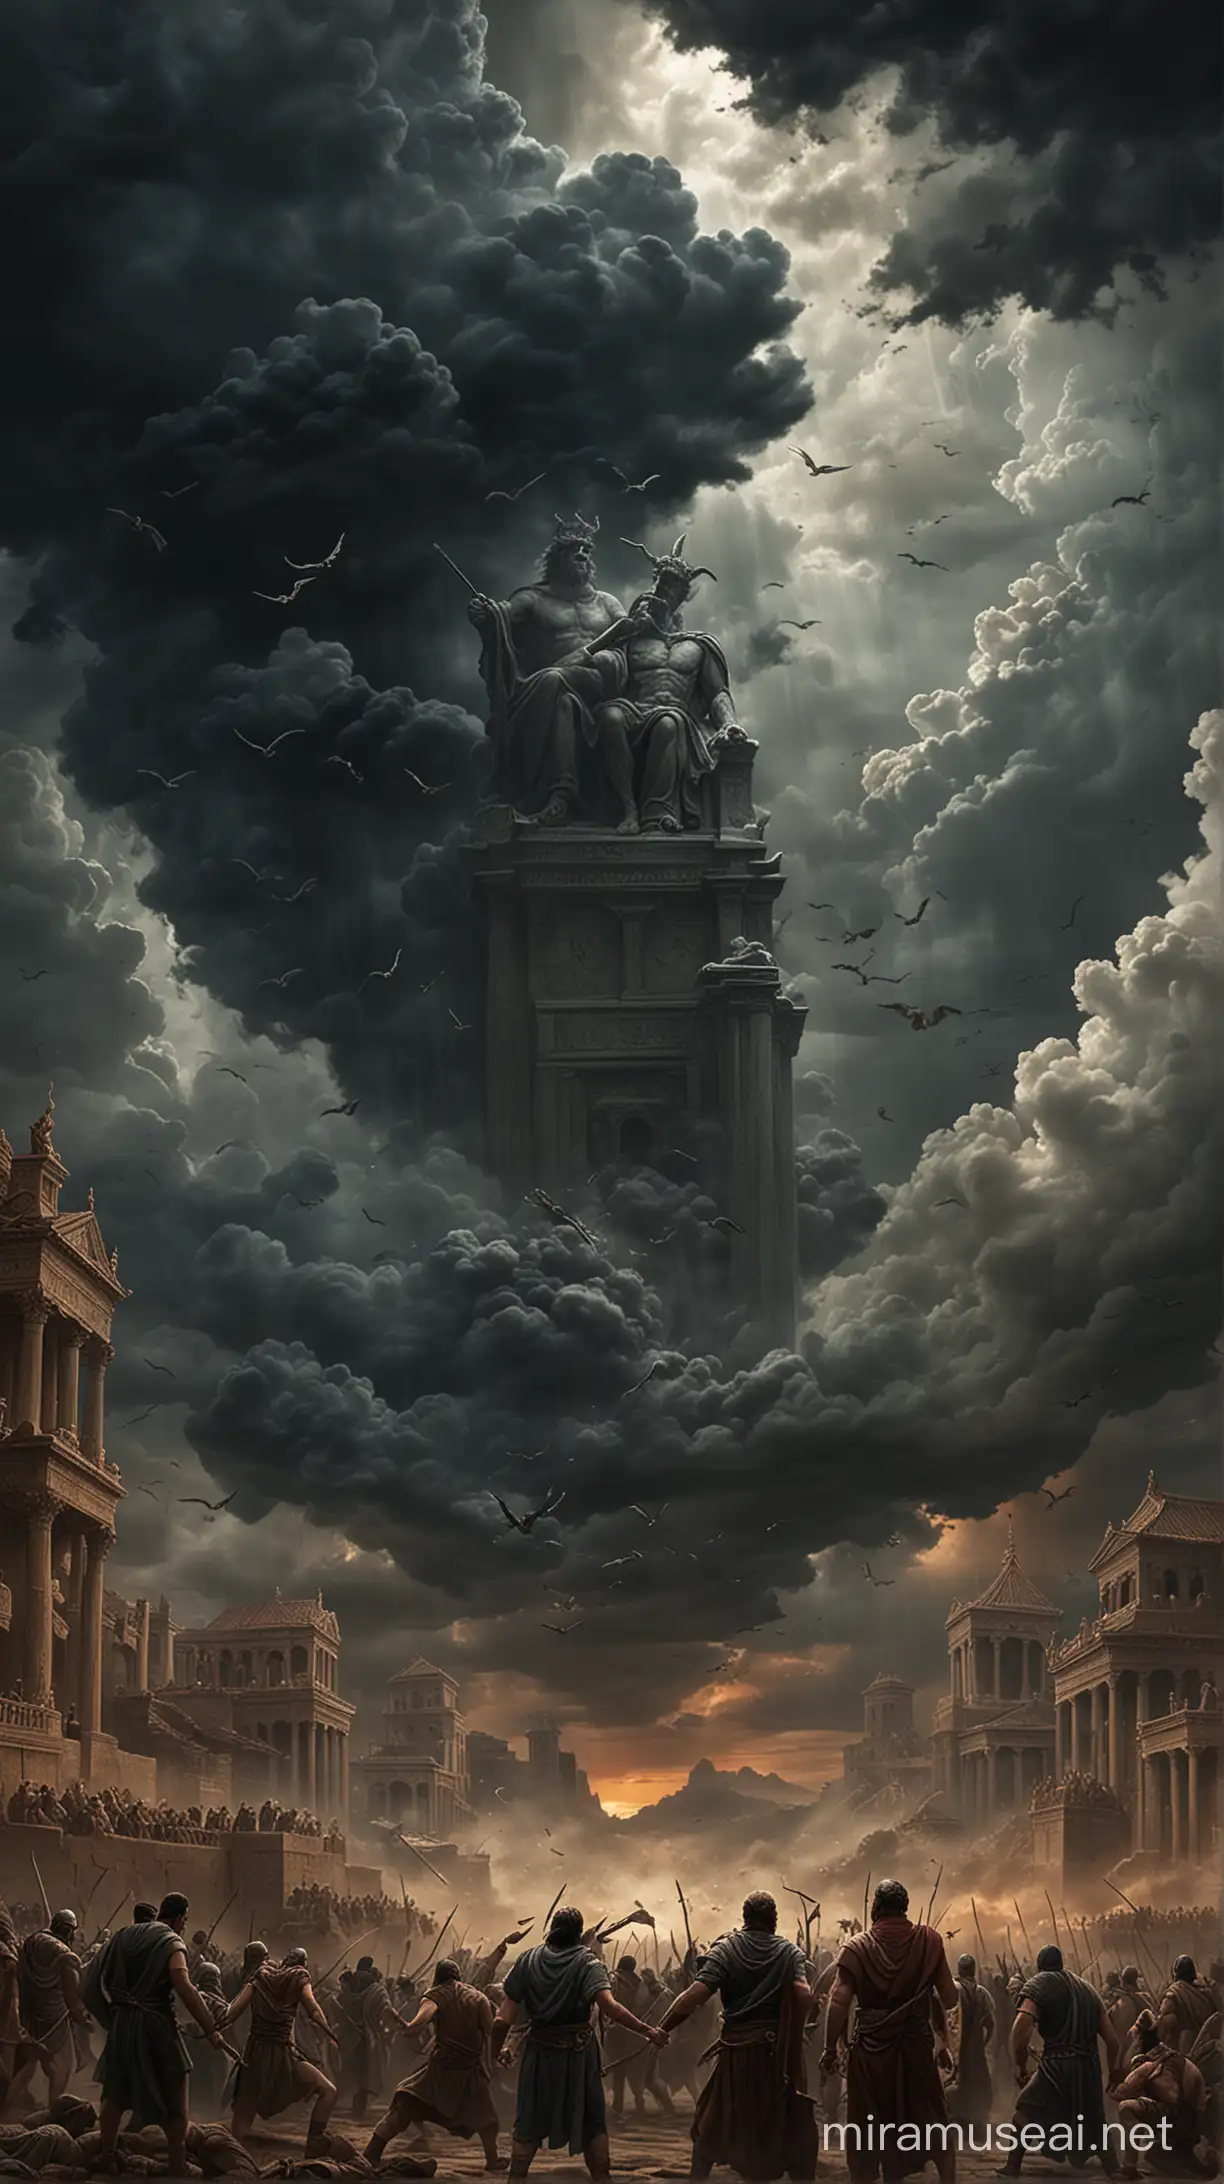 An illustration depicting the extent of human wickedness, with ominous clouds looming overhead and people engaging in various acts of evil in the ancient world 